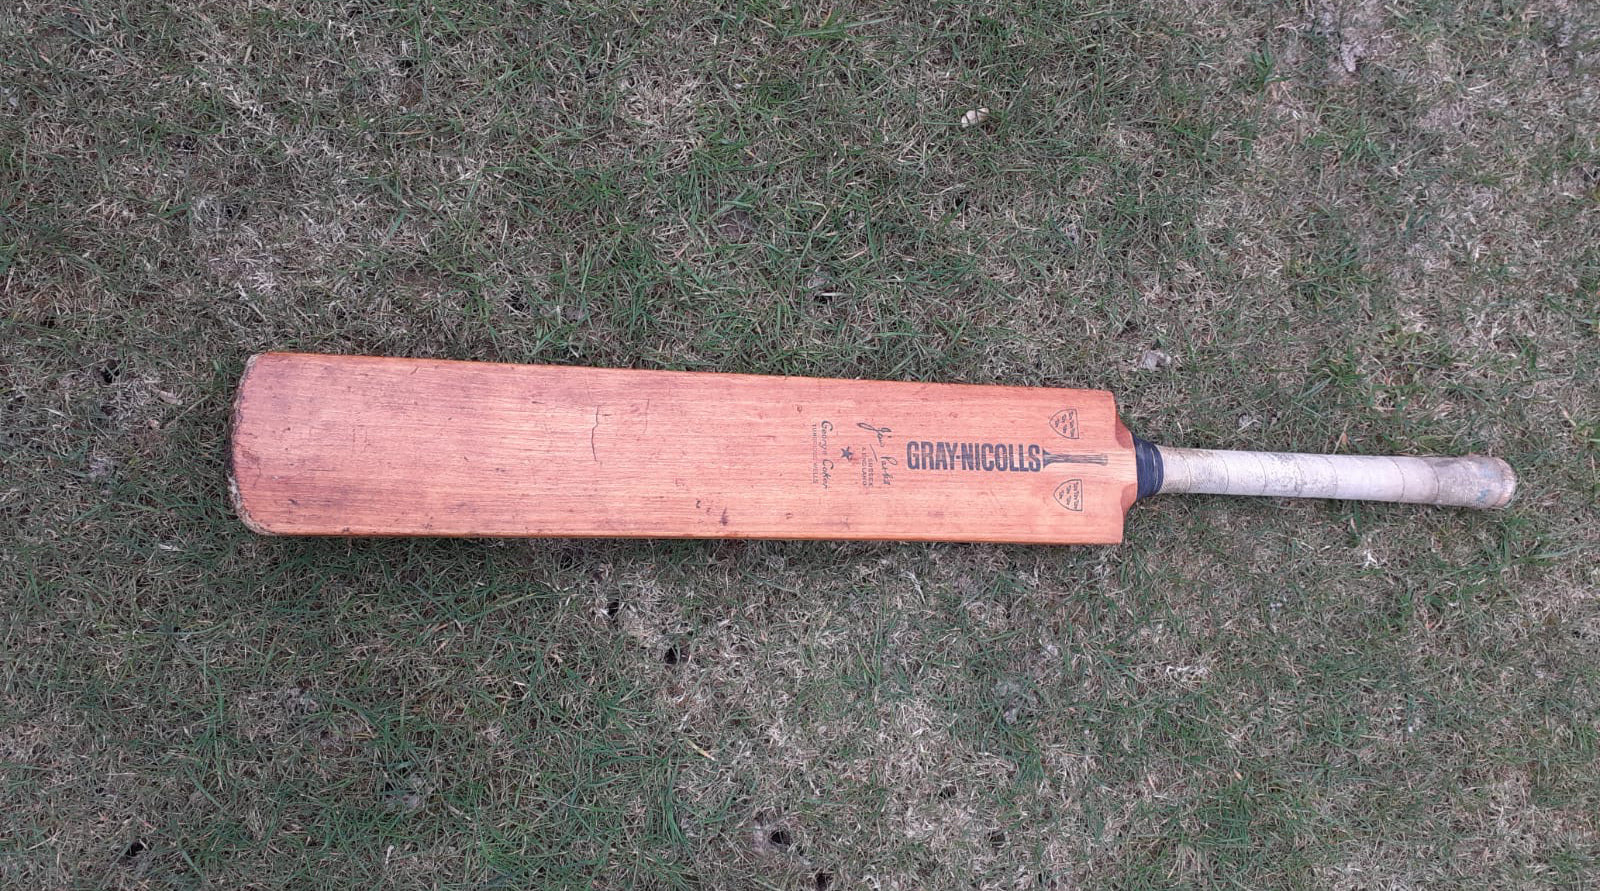 Everyone remembers their first cricket bat